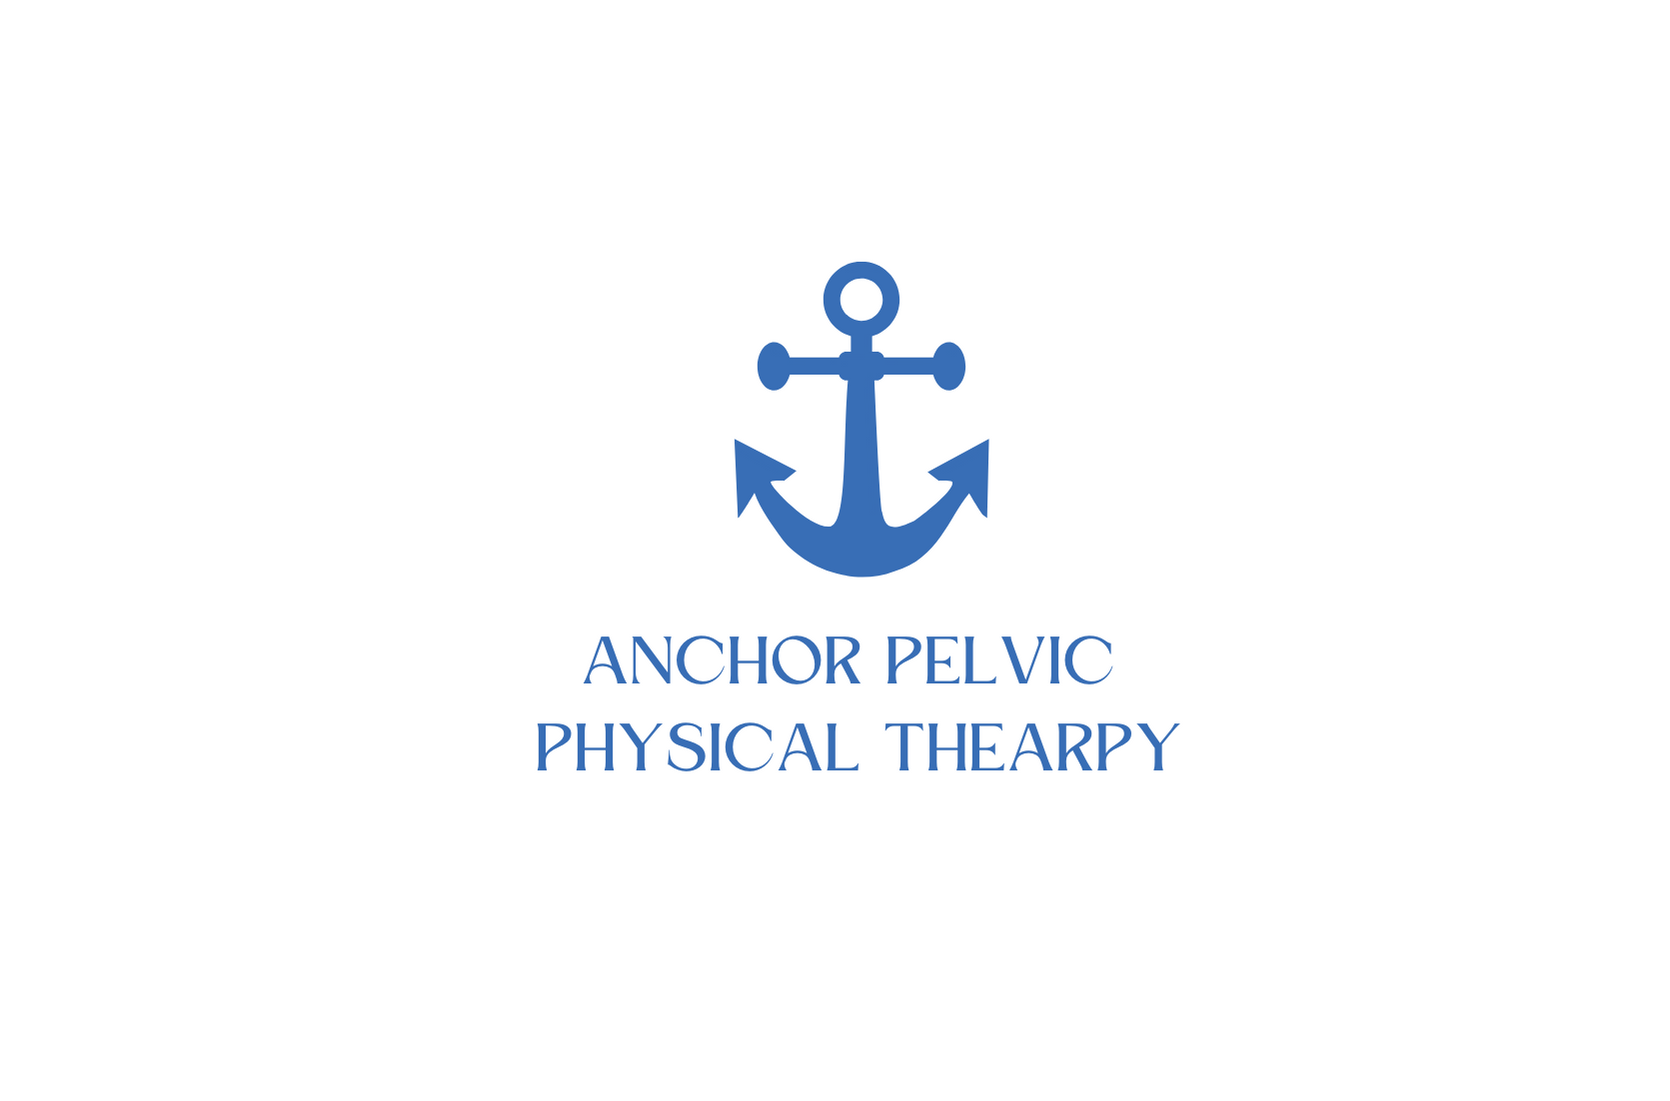 Anchor Pelvic Physical Therapy - Allie Demers